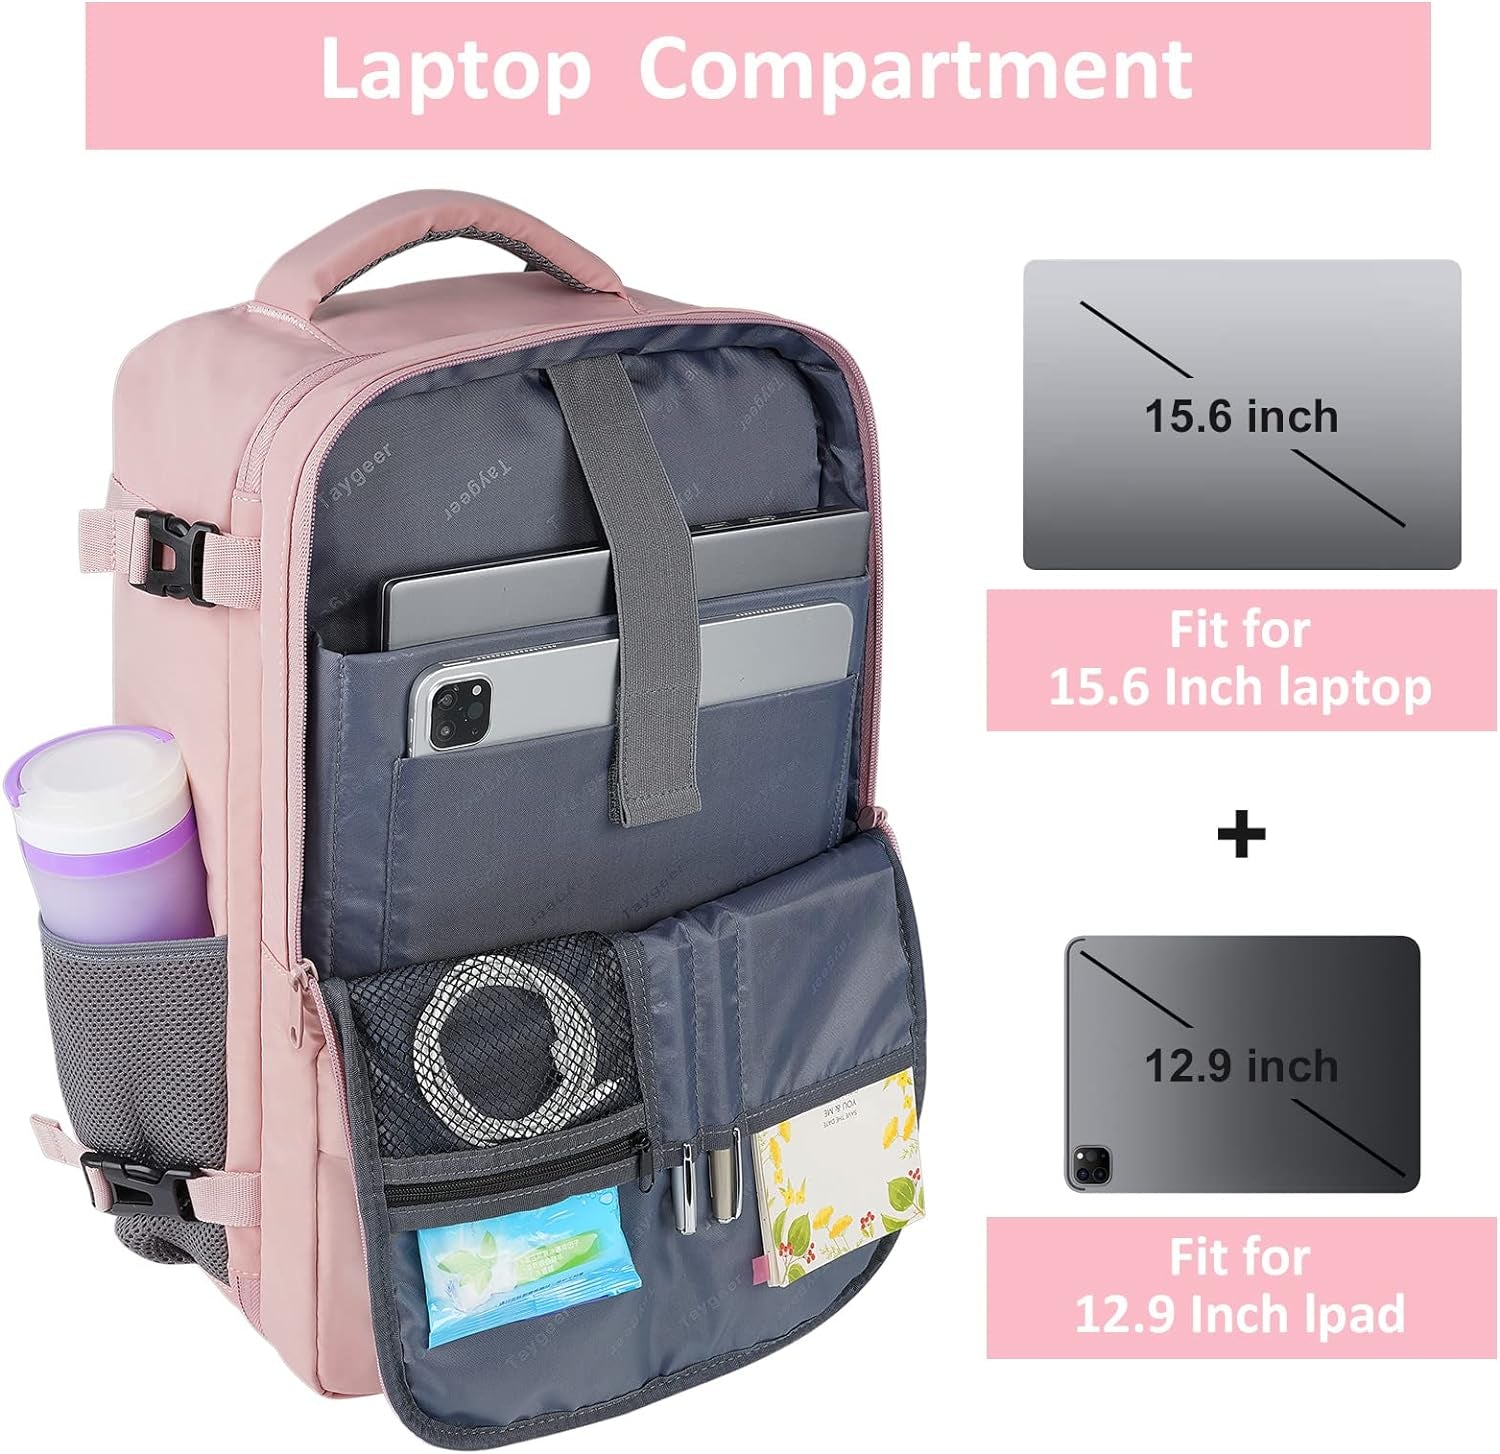 Travel Backpack for Women, Carry on Backpack with USB Charging Port & Shoe Pouch, TSA 15.6Inch Laptop Backpack Flight Approved, Nurse Bag Casual Daypack for Weekender Business Hiking, Pink